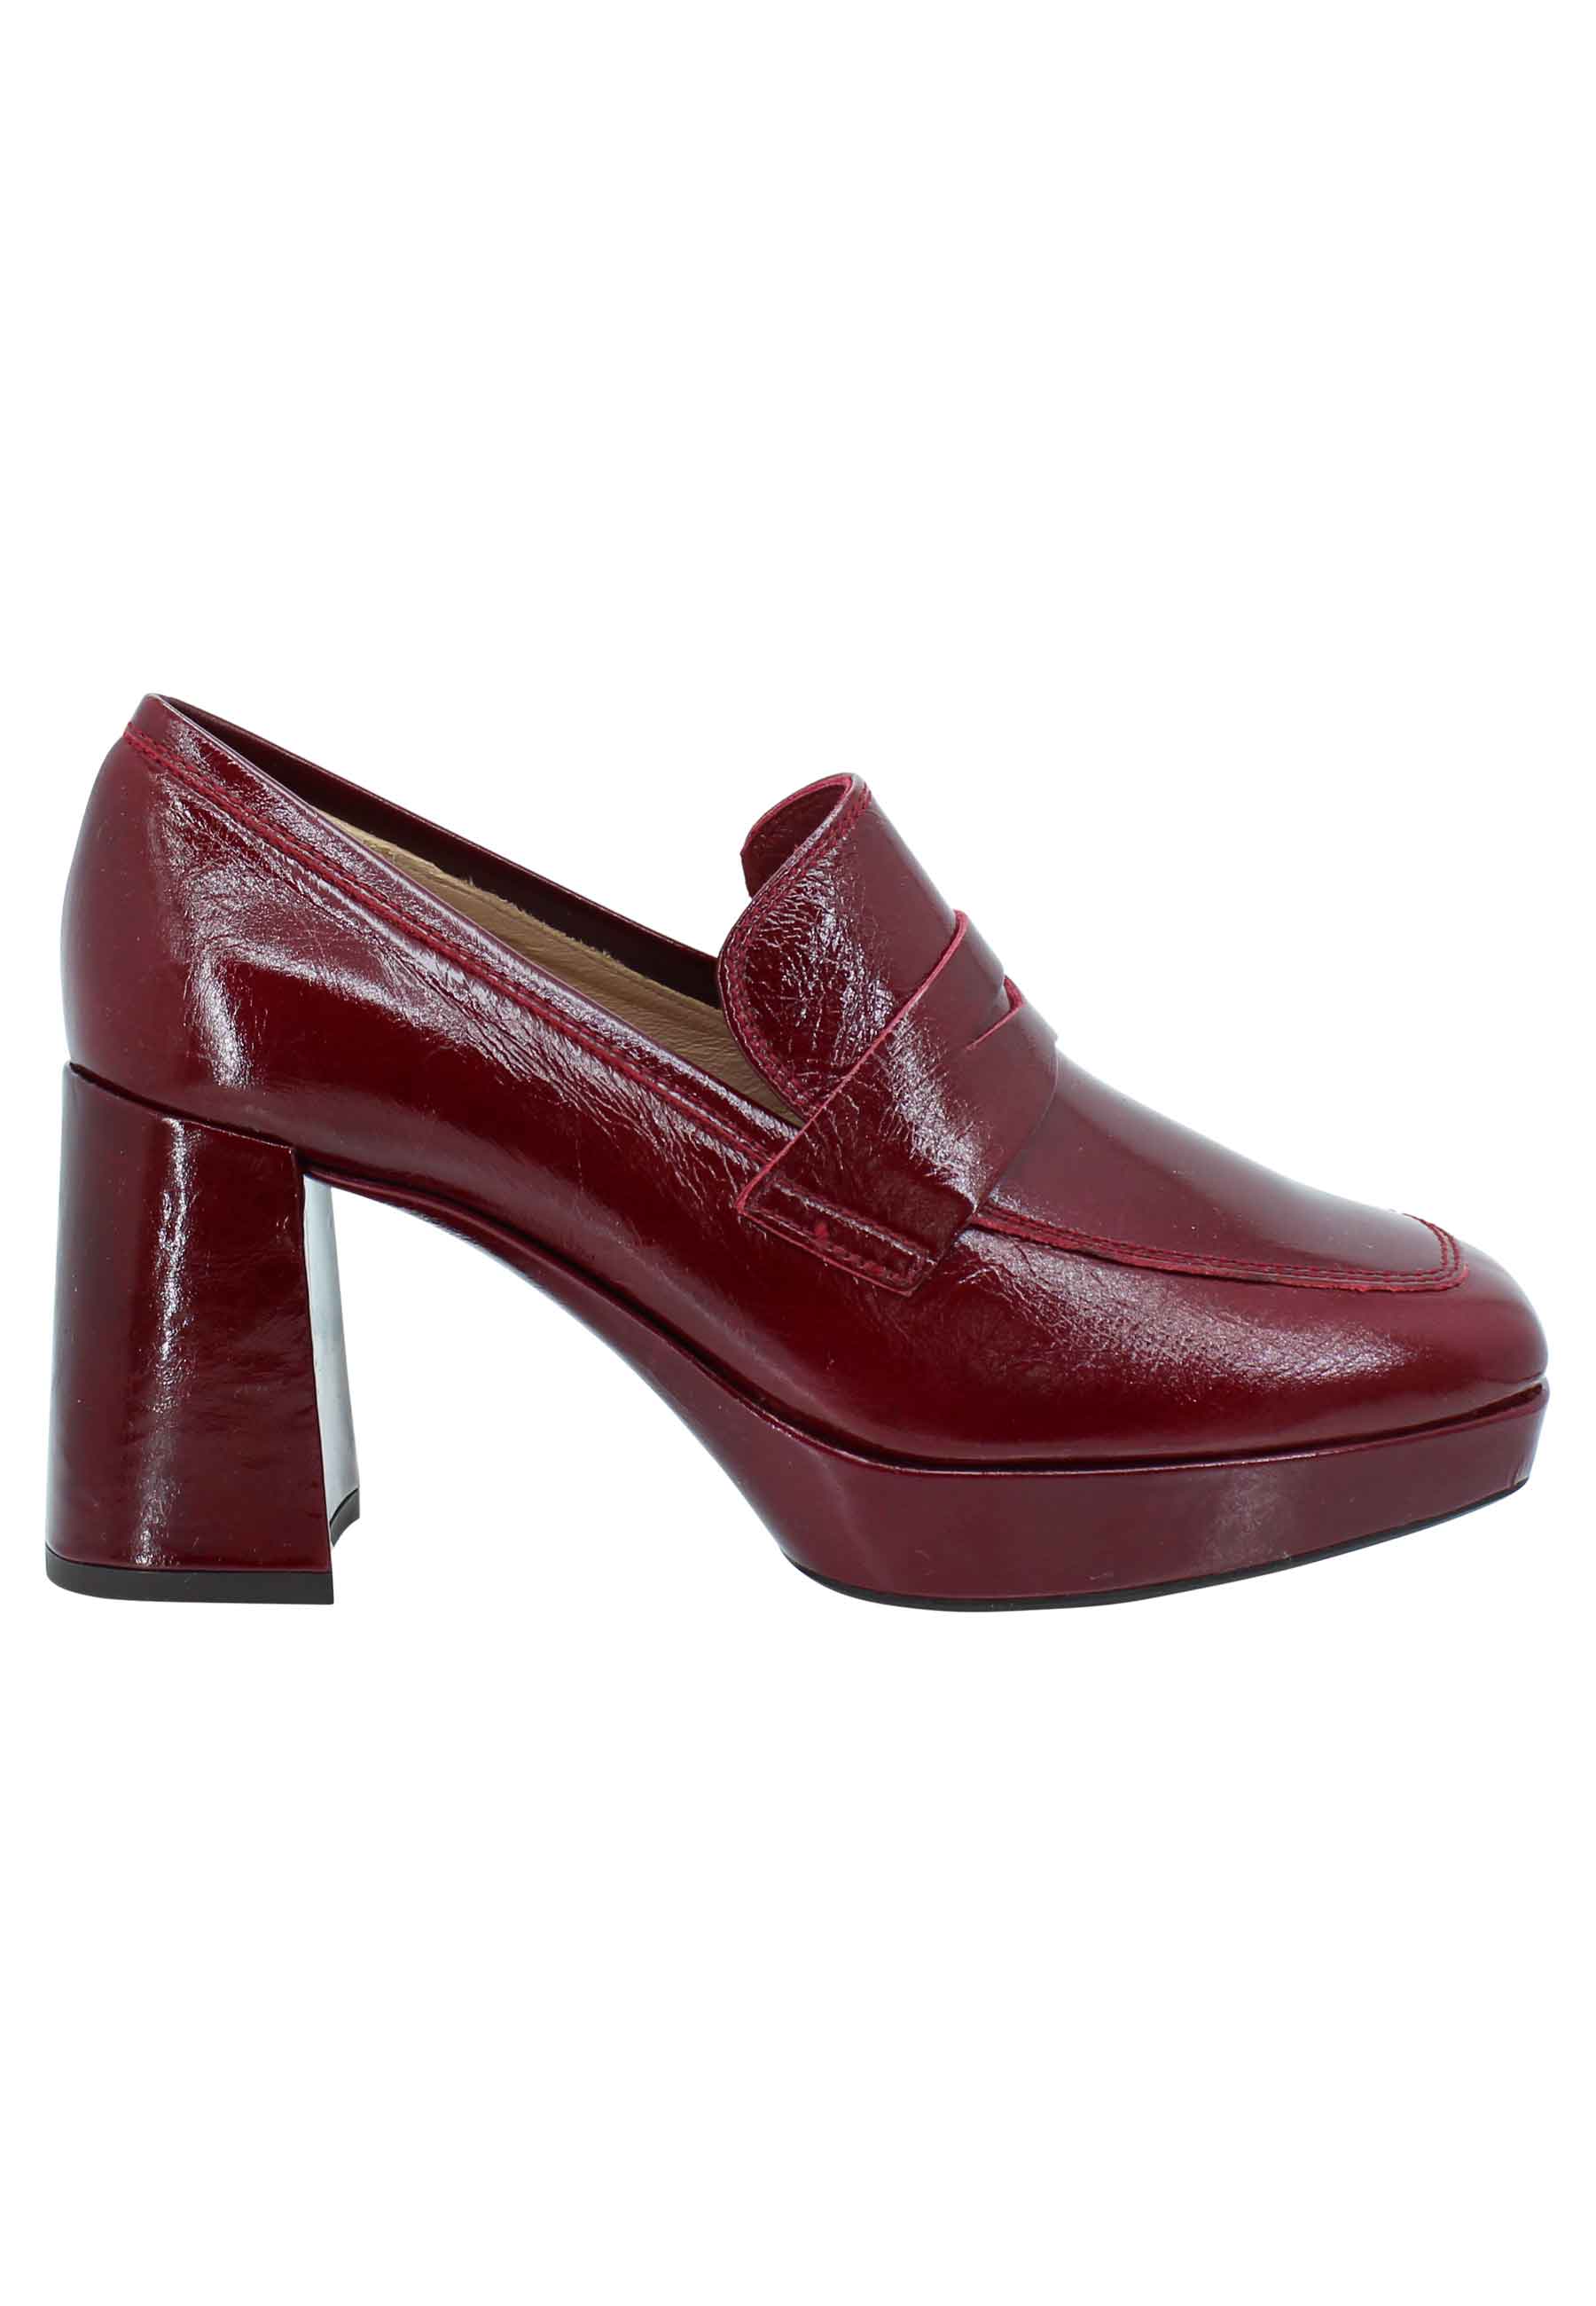 Women's burgundy patent moccasins with high heel and platform